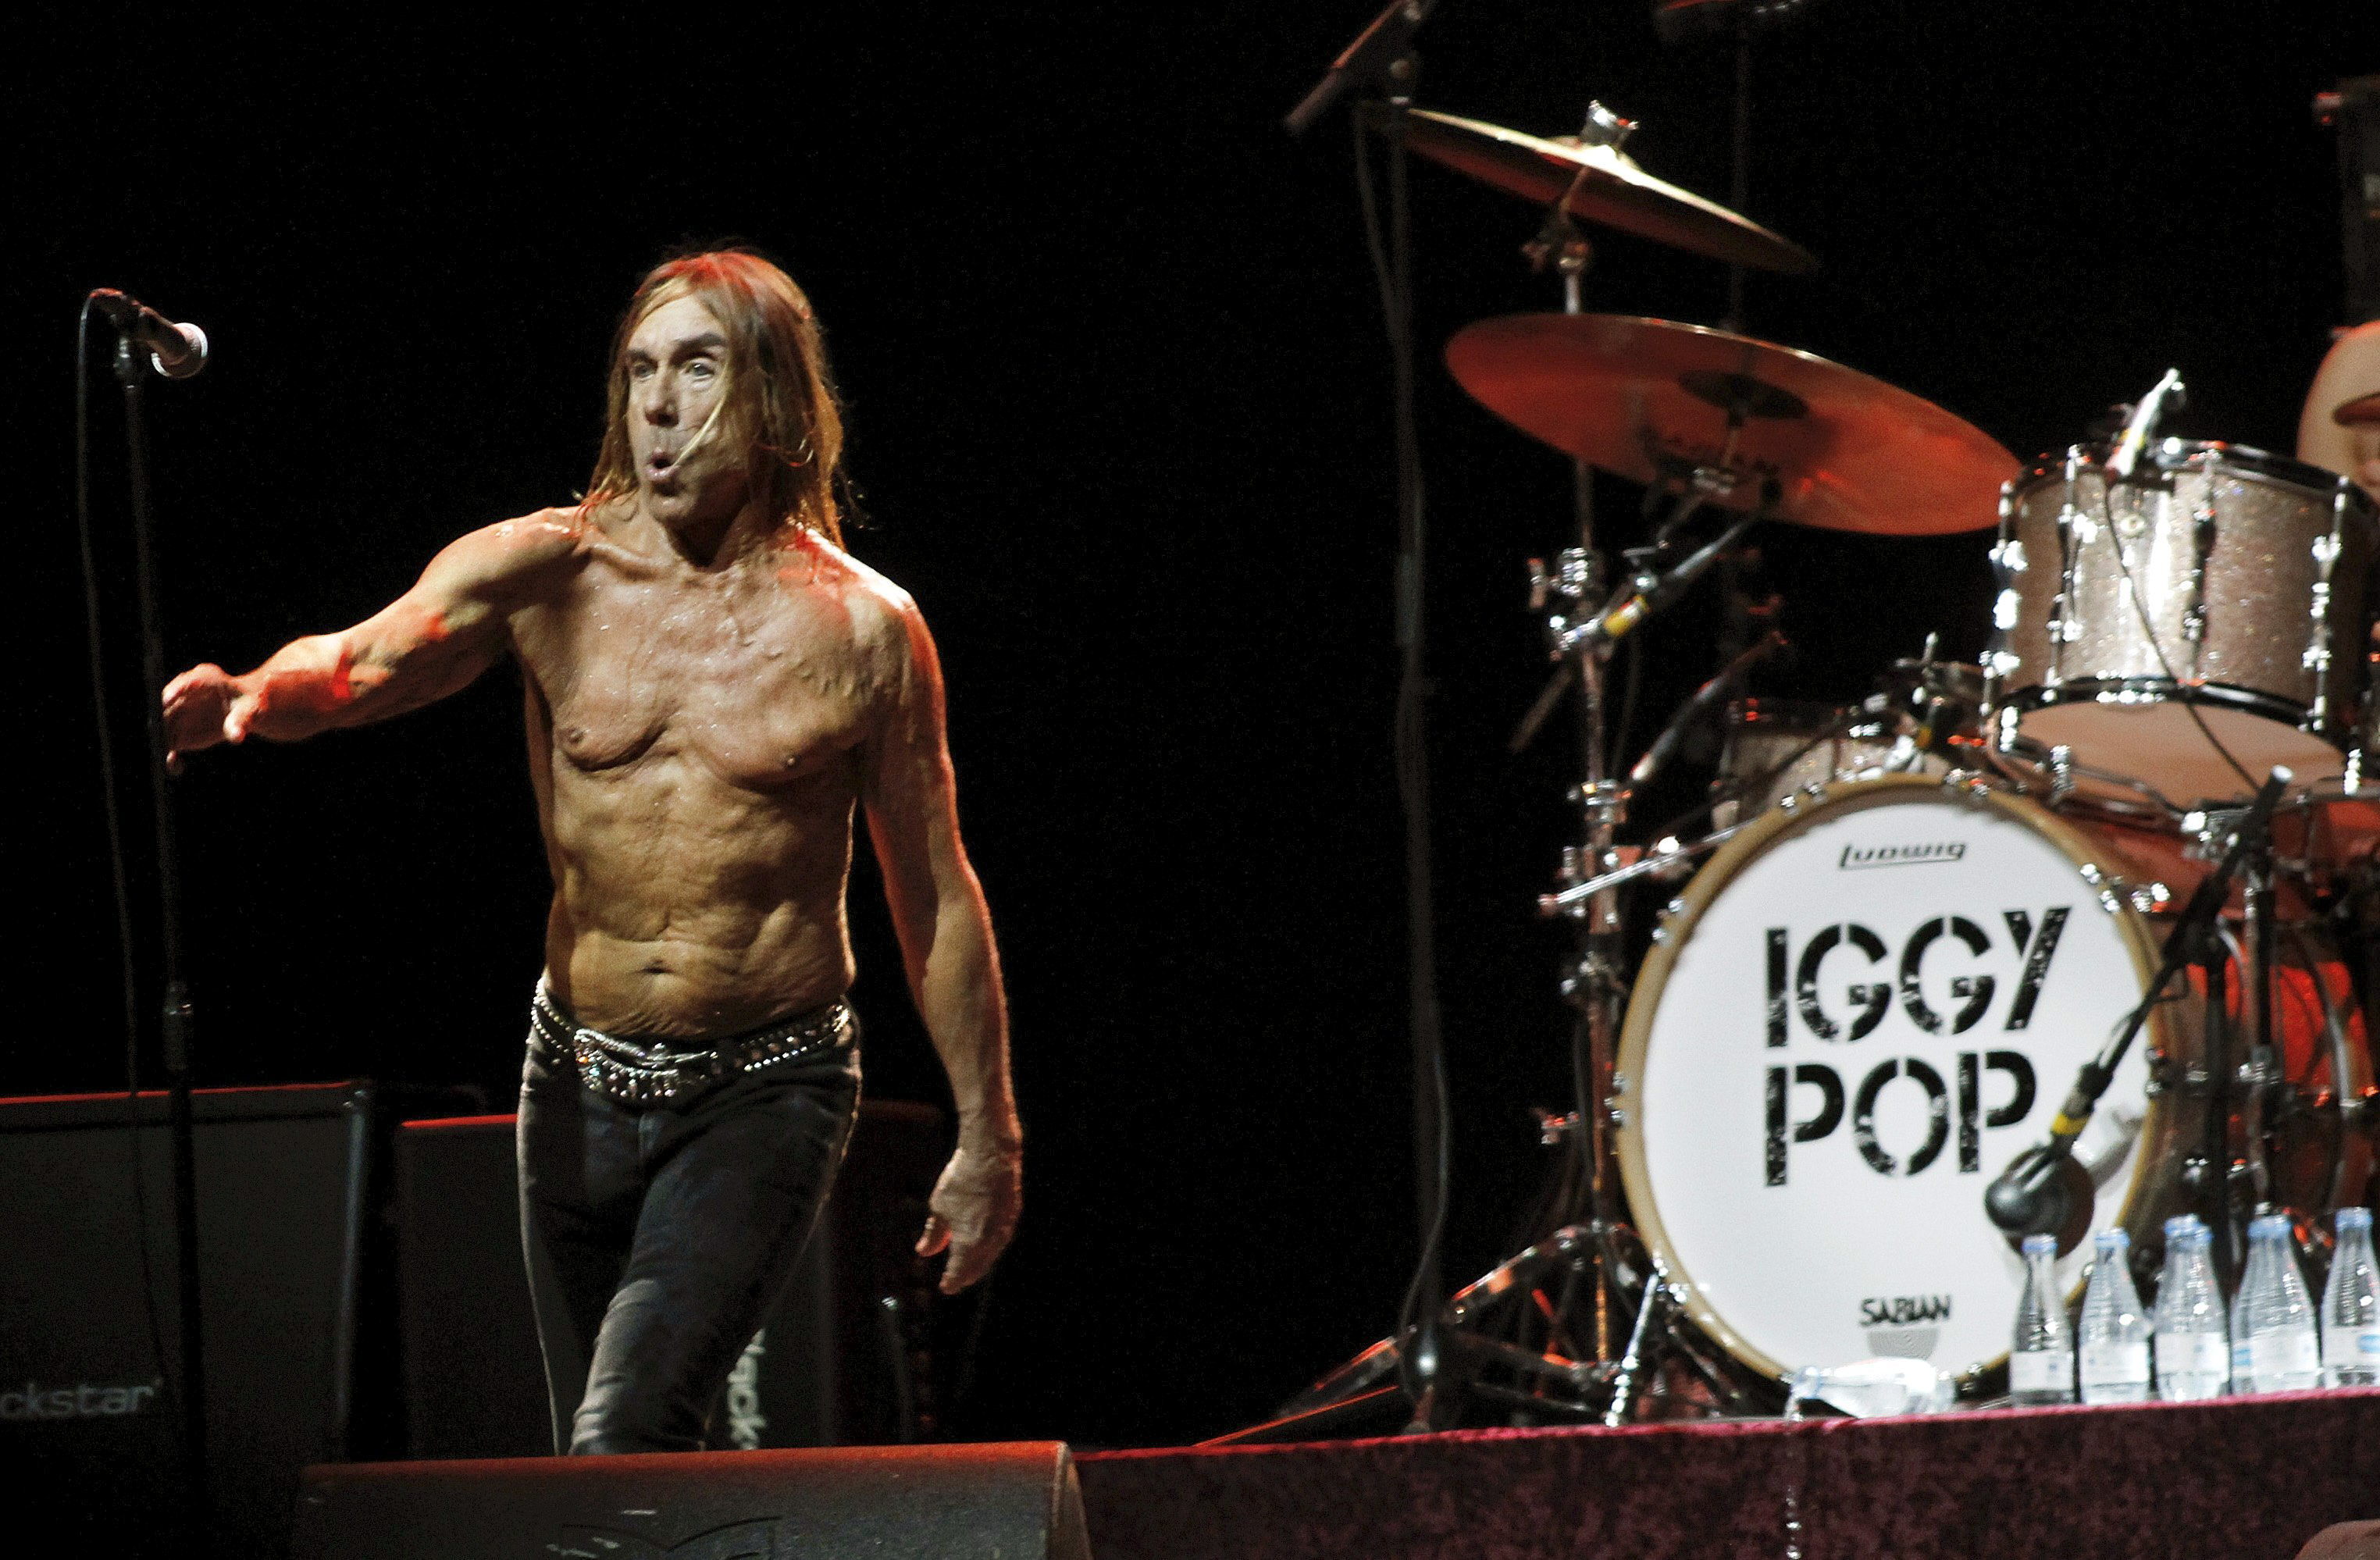 Iggy Pop's musical proposal has not caught the attention of academics Photo: Efe/Alberto Morante